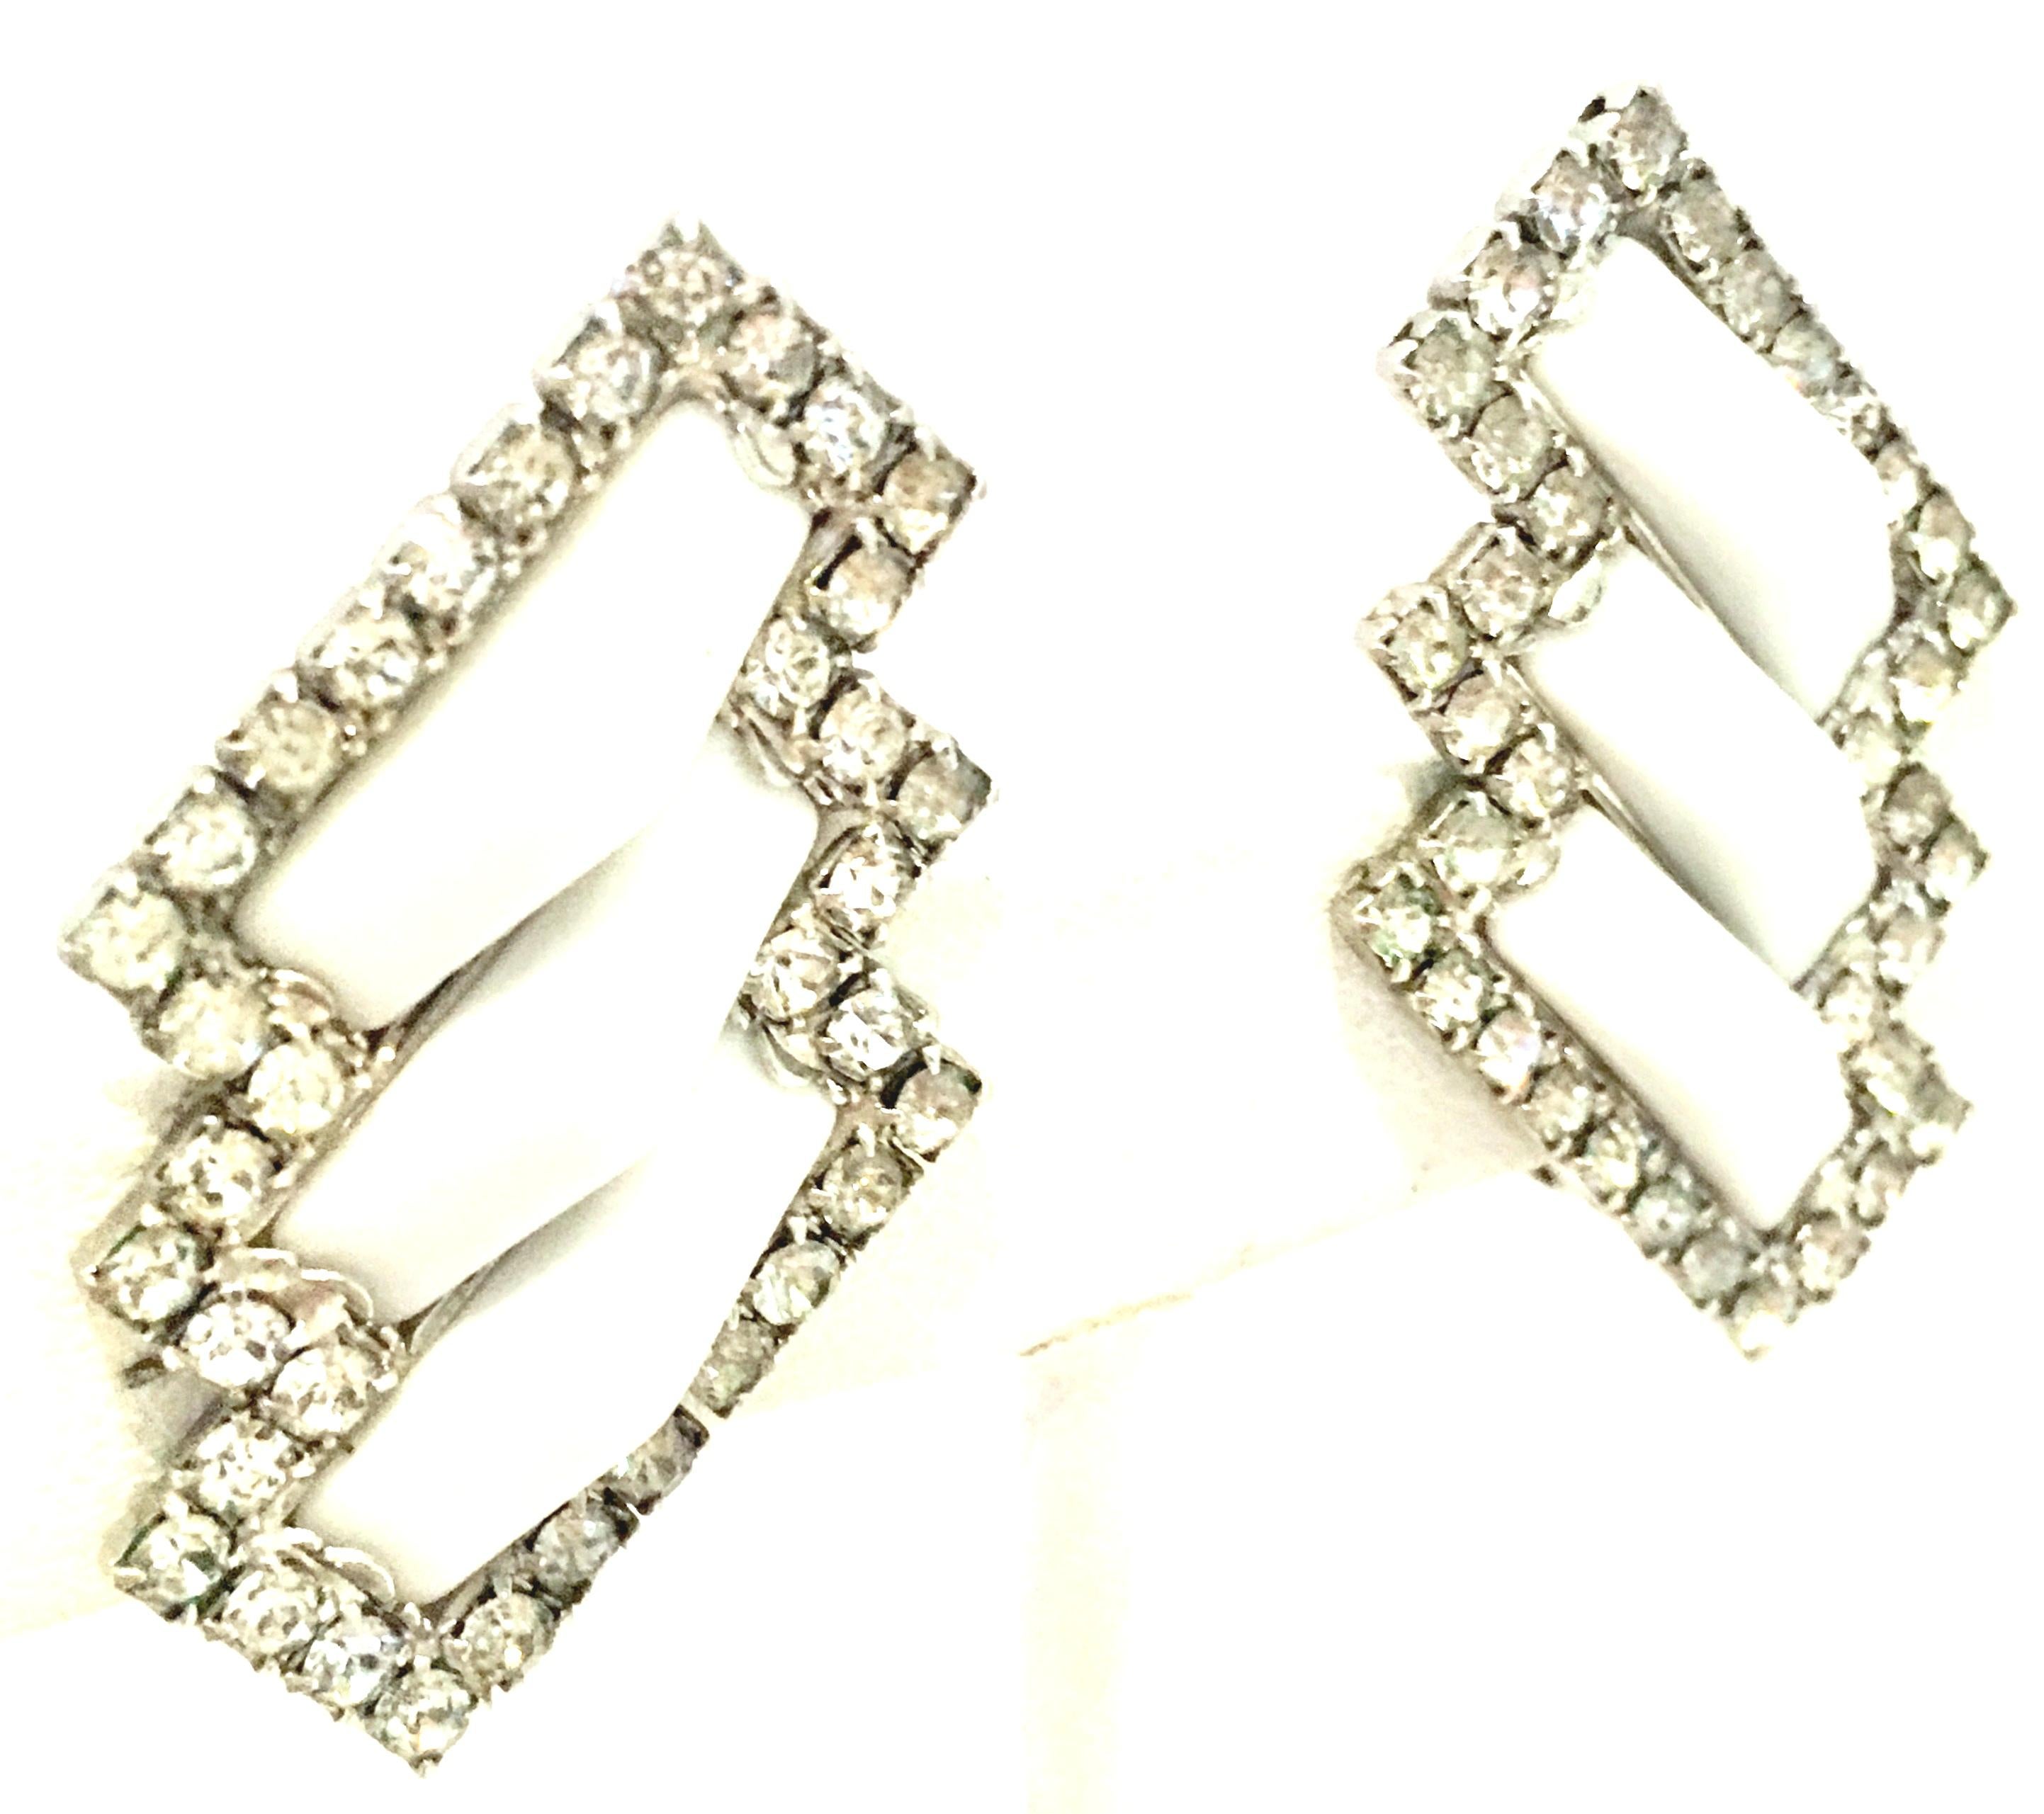 20th Century Pair Of Art Deco Style Silver, Austrian Crystal & White Lucite Dimensional Earrings. These unique clip style earrings feature silver plate pave set colorless brilliant cut and faceted Austrian crystal stones with inset white dimensional